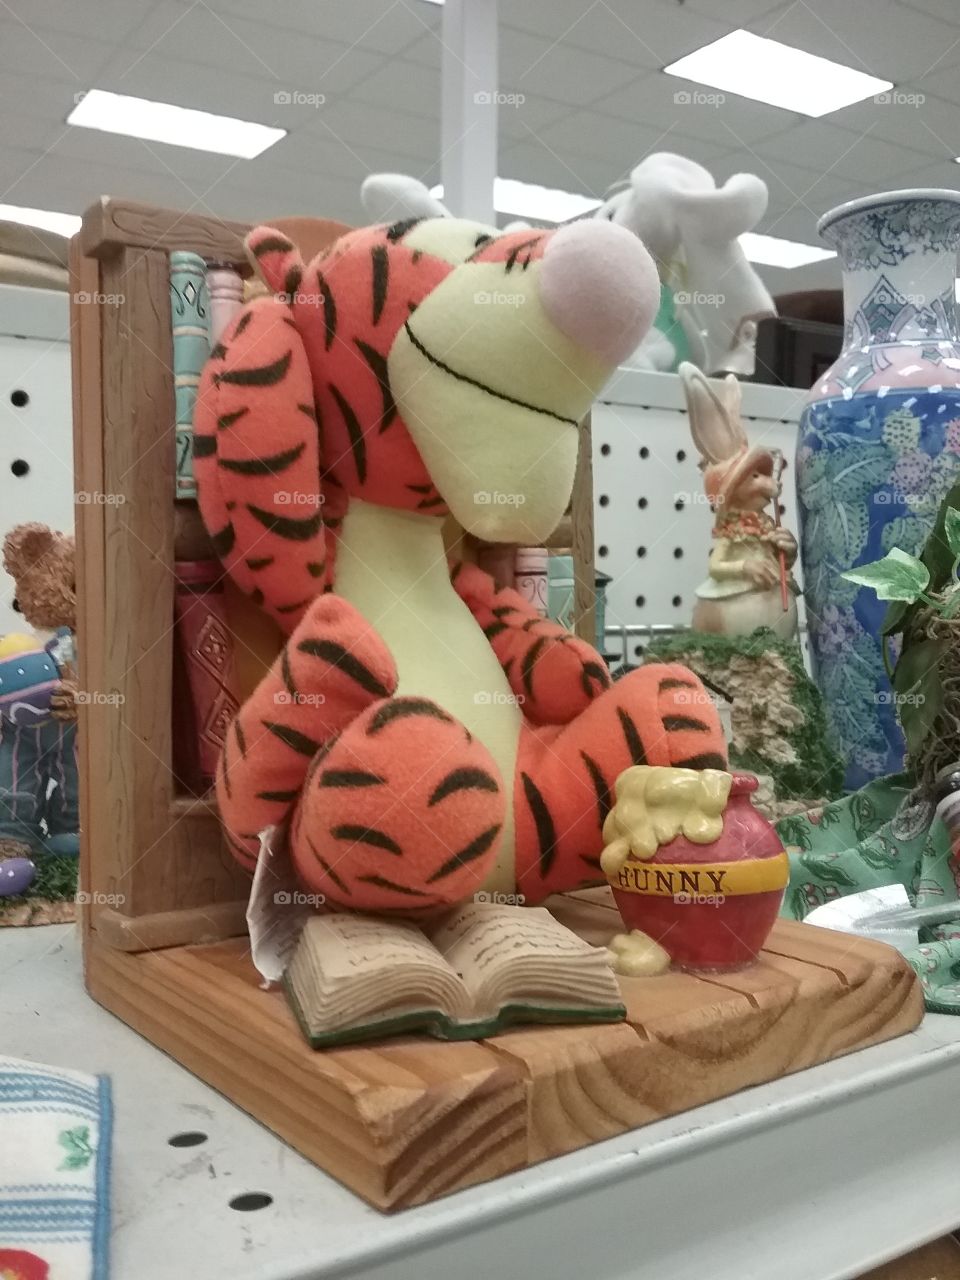 tiger from Winnie the pooh